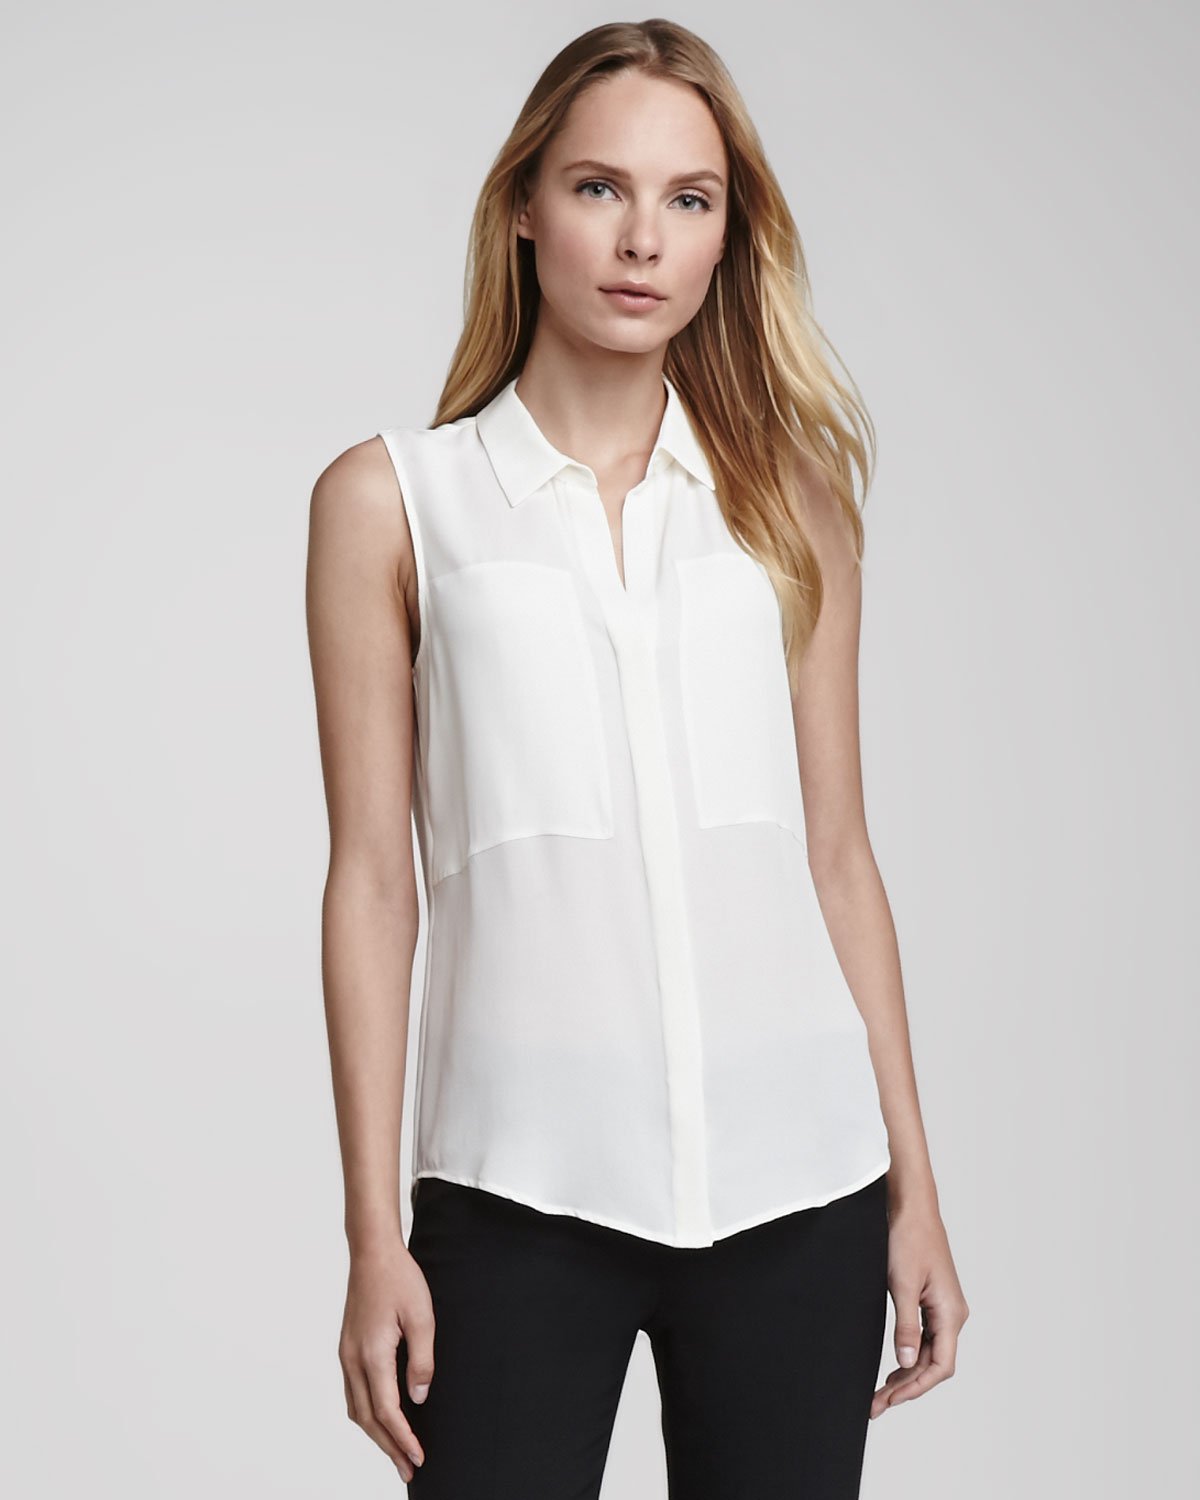 Lyst - Theory Duria Sleeveless Silk Blouse in White